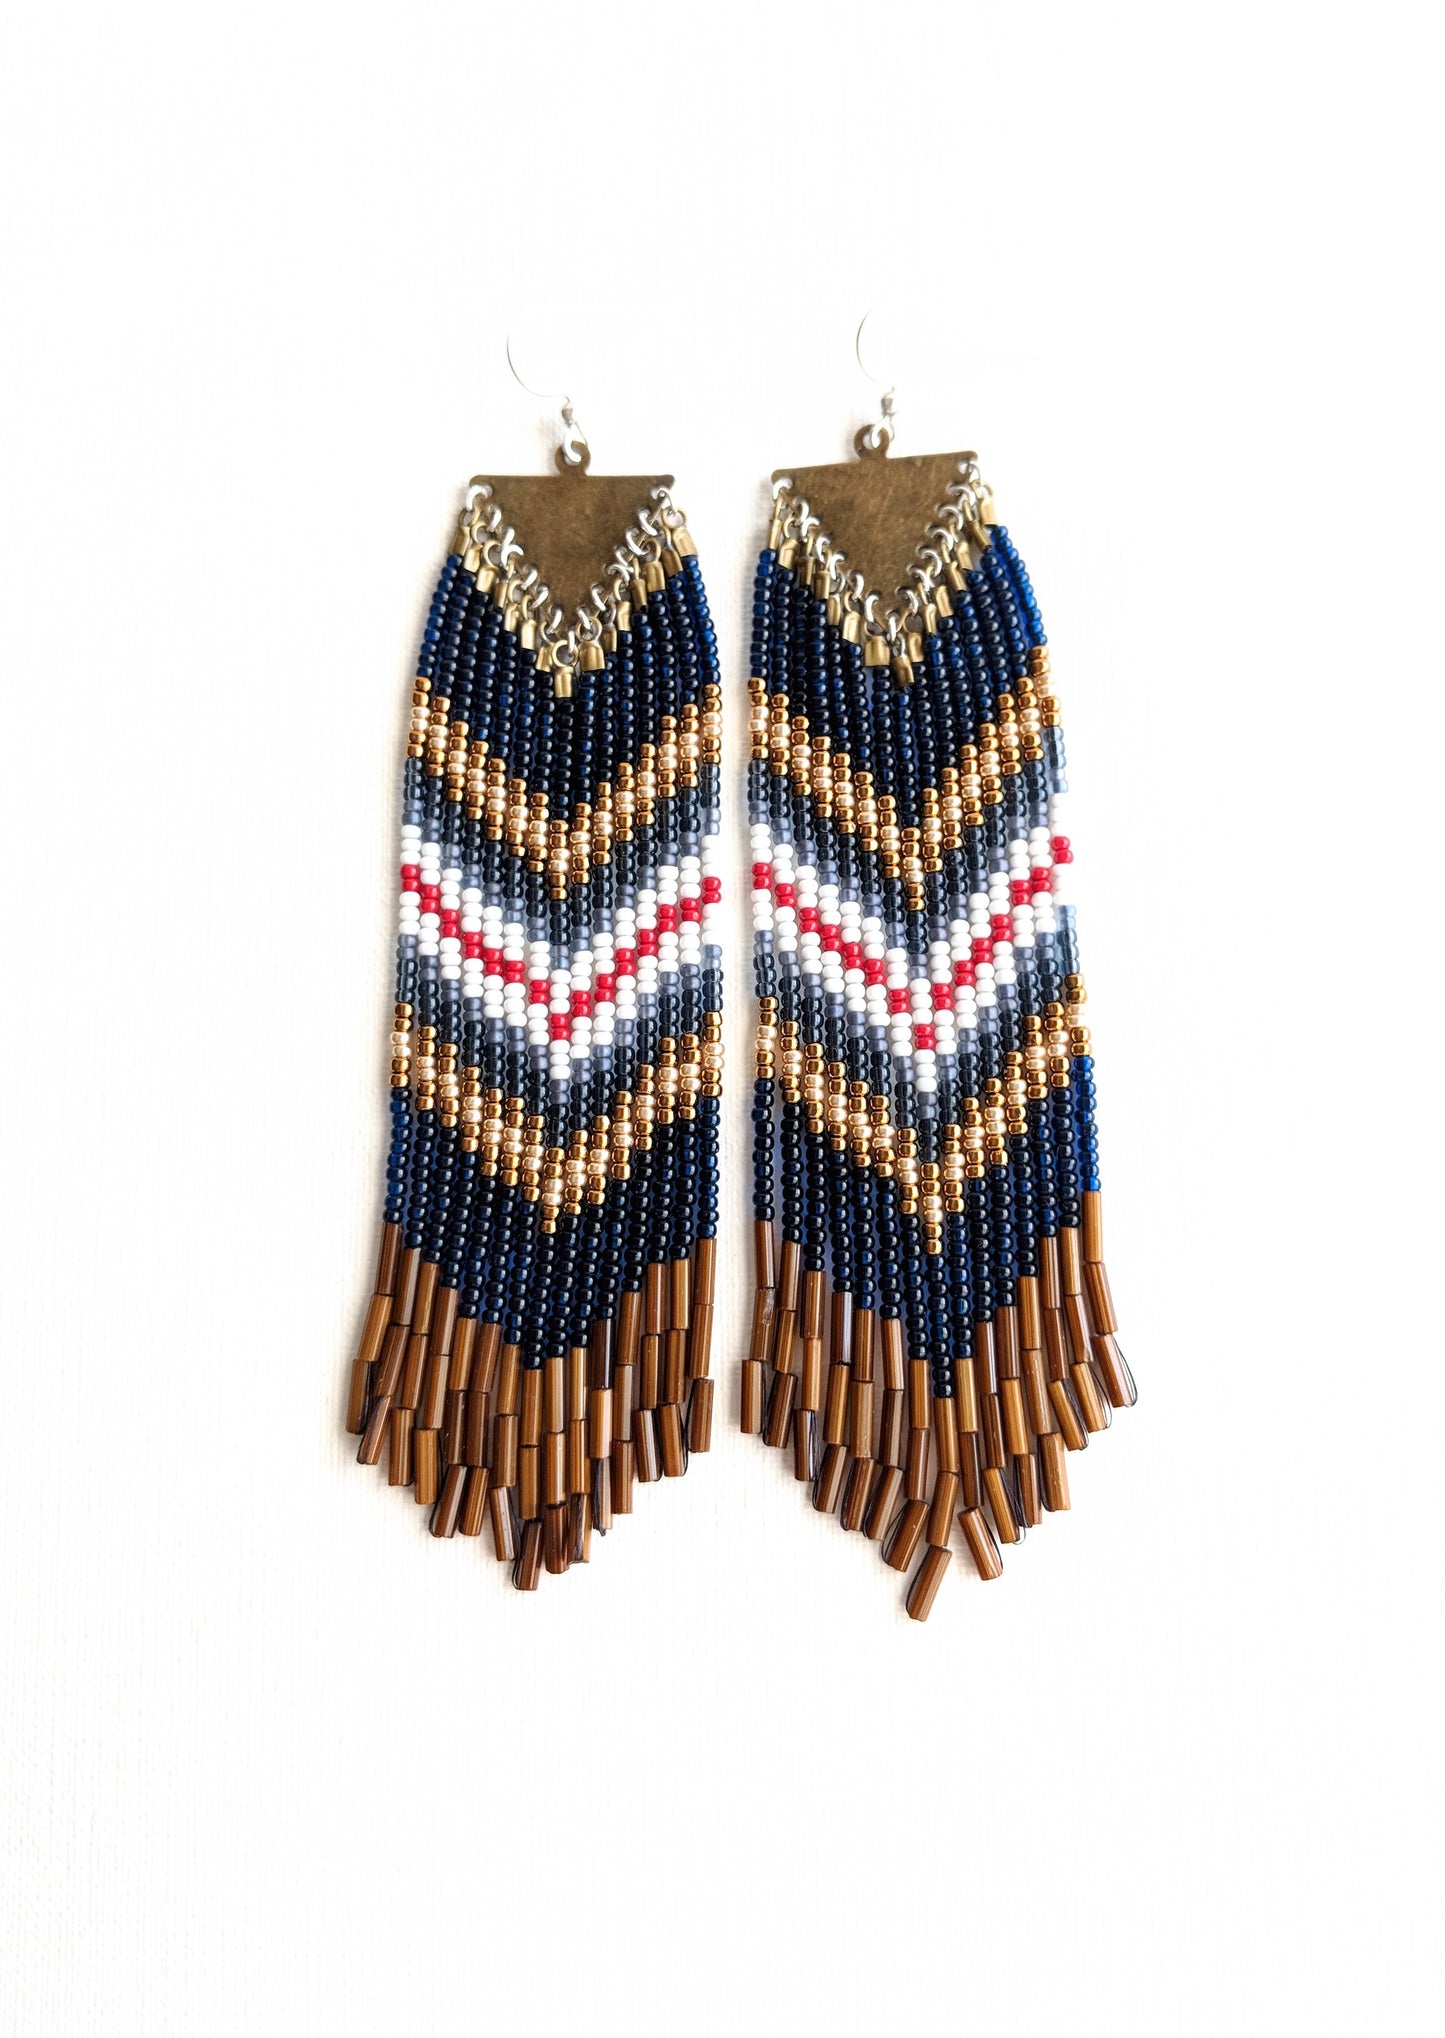 Moon & Milk - Native American style fringe earrings with a red, white, and blue chevron design. 